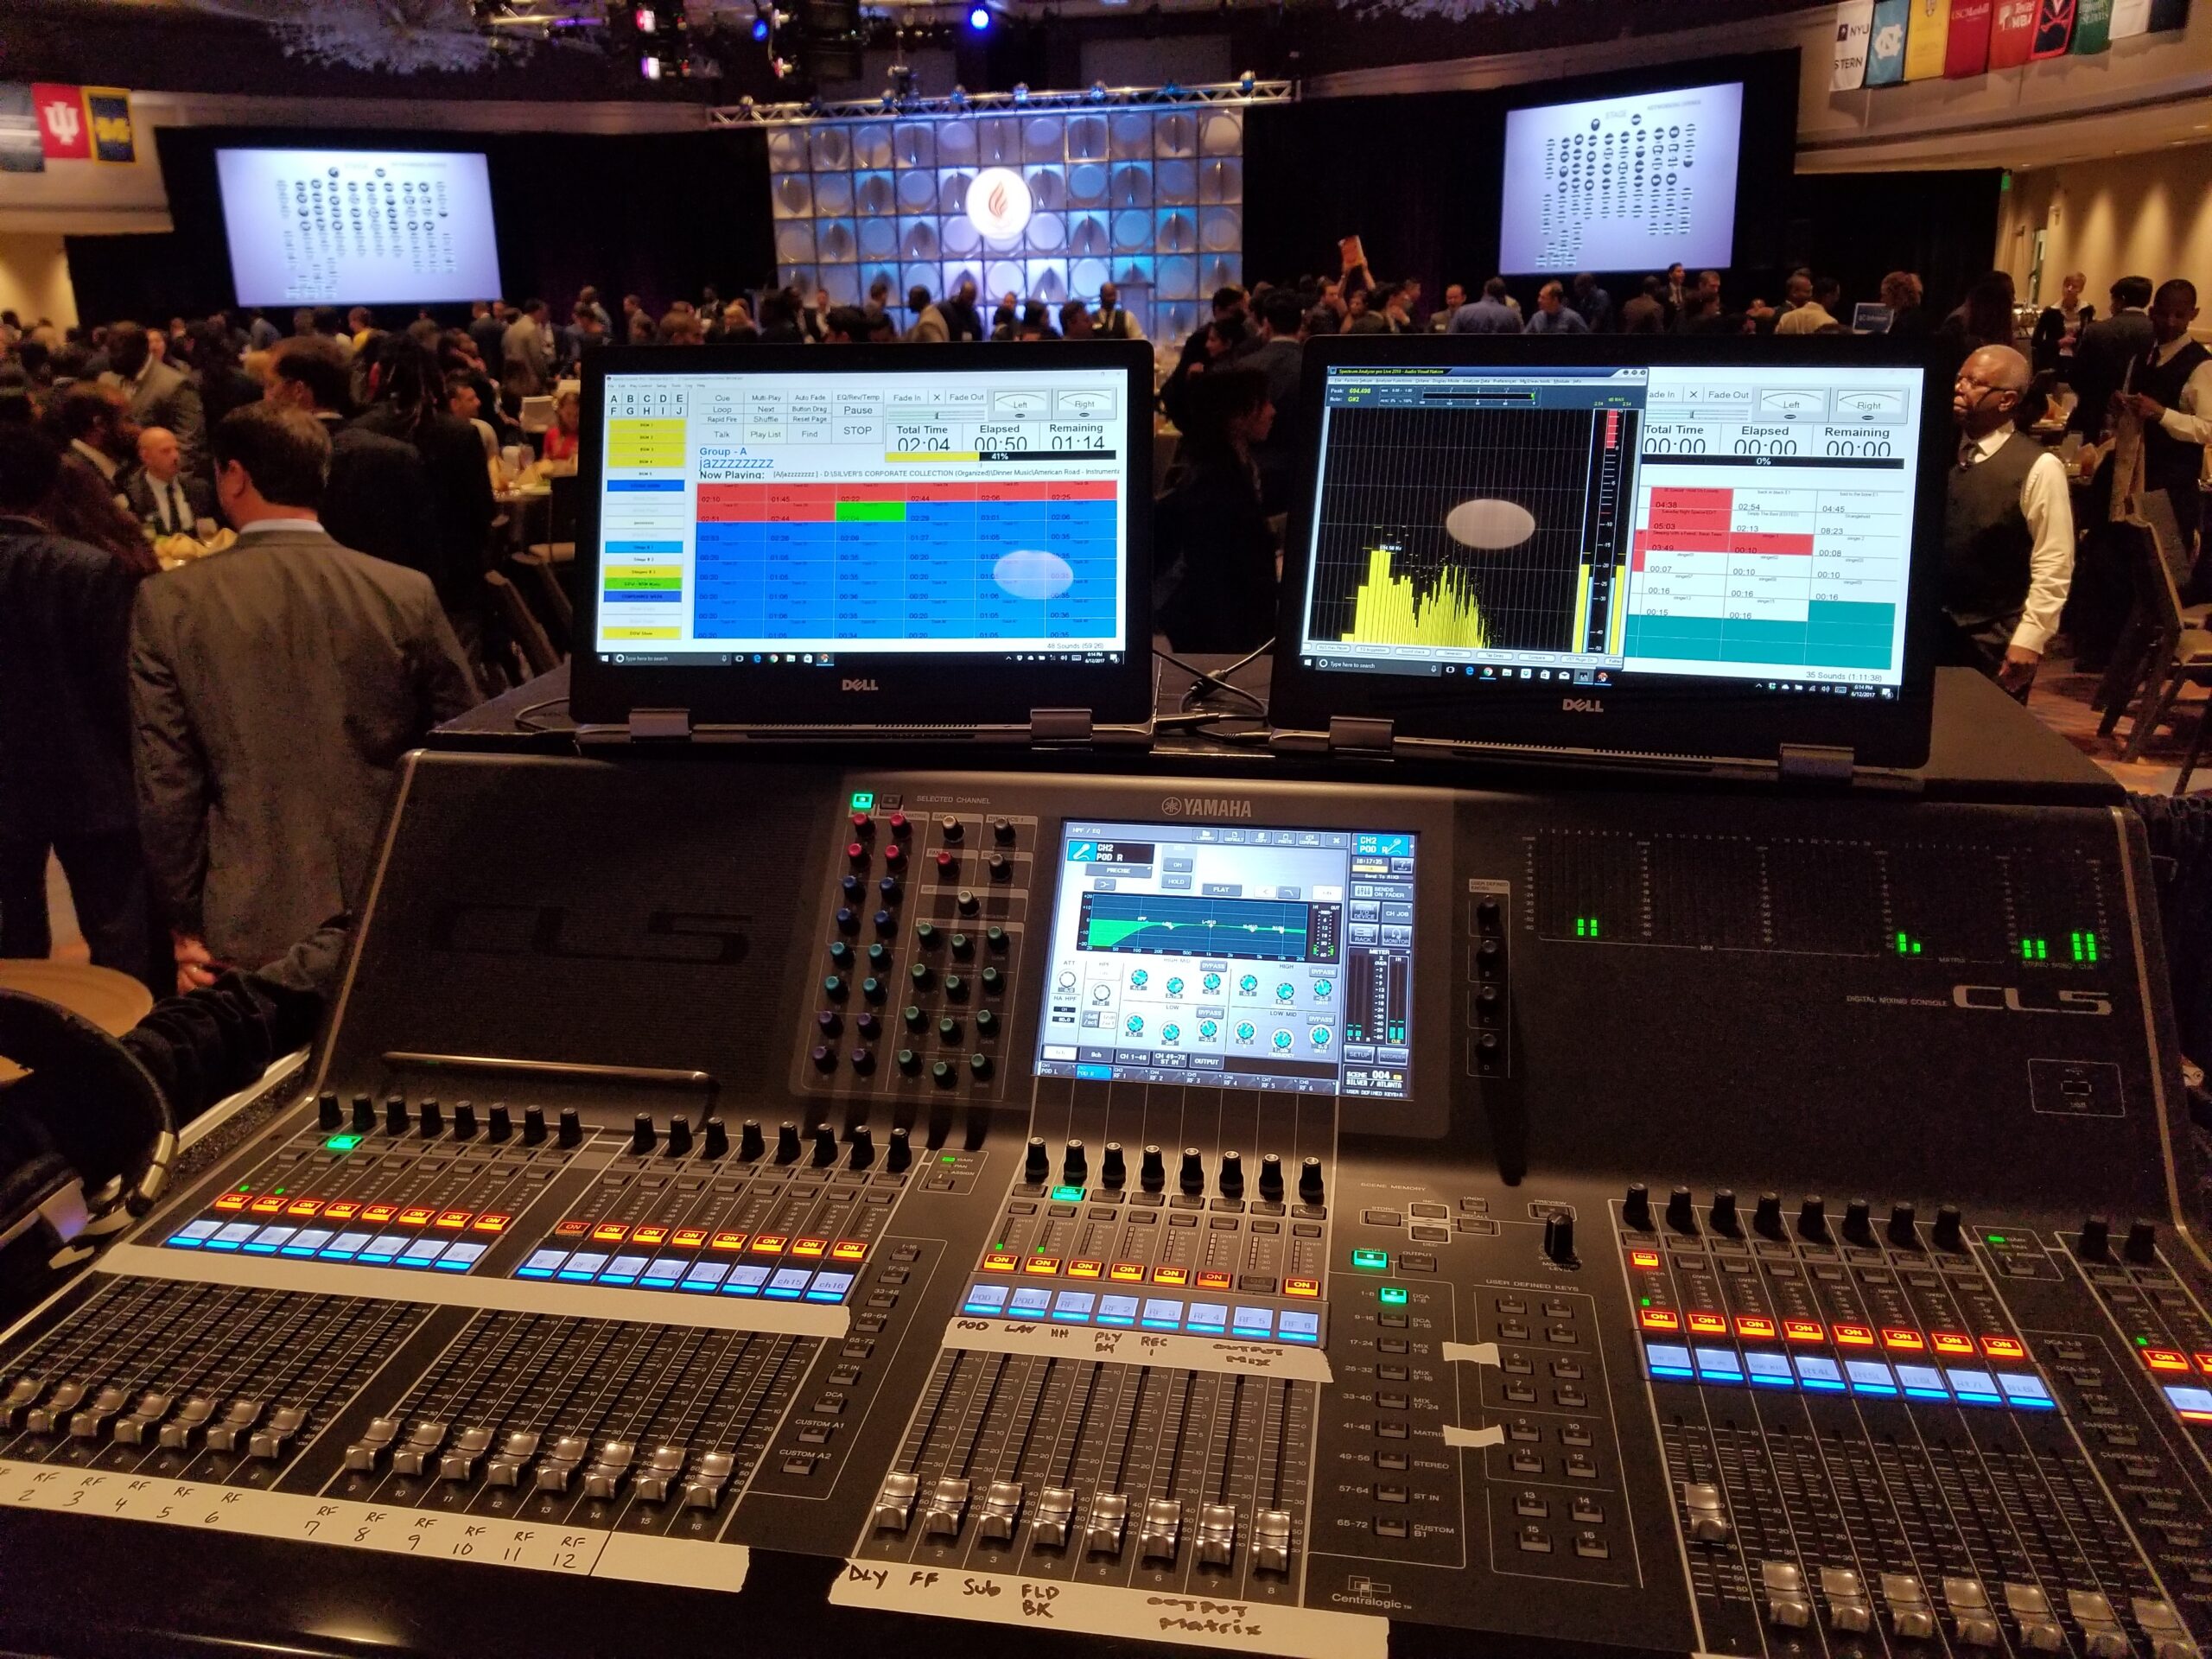 A close-up view of a sound mixing console with multiple displays, buttons, and sliders, at a live event.